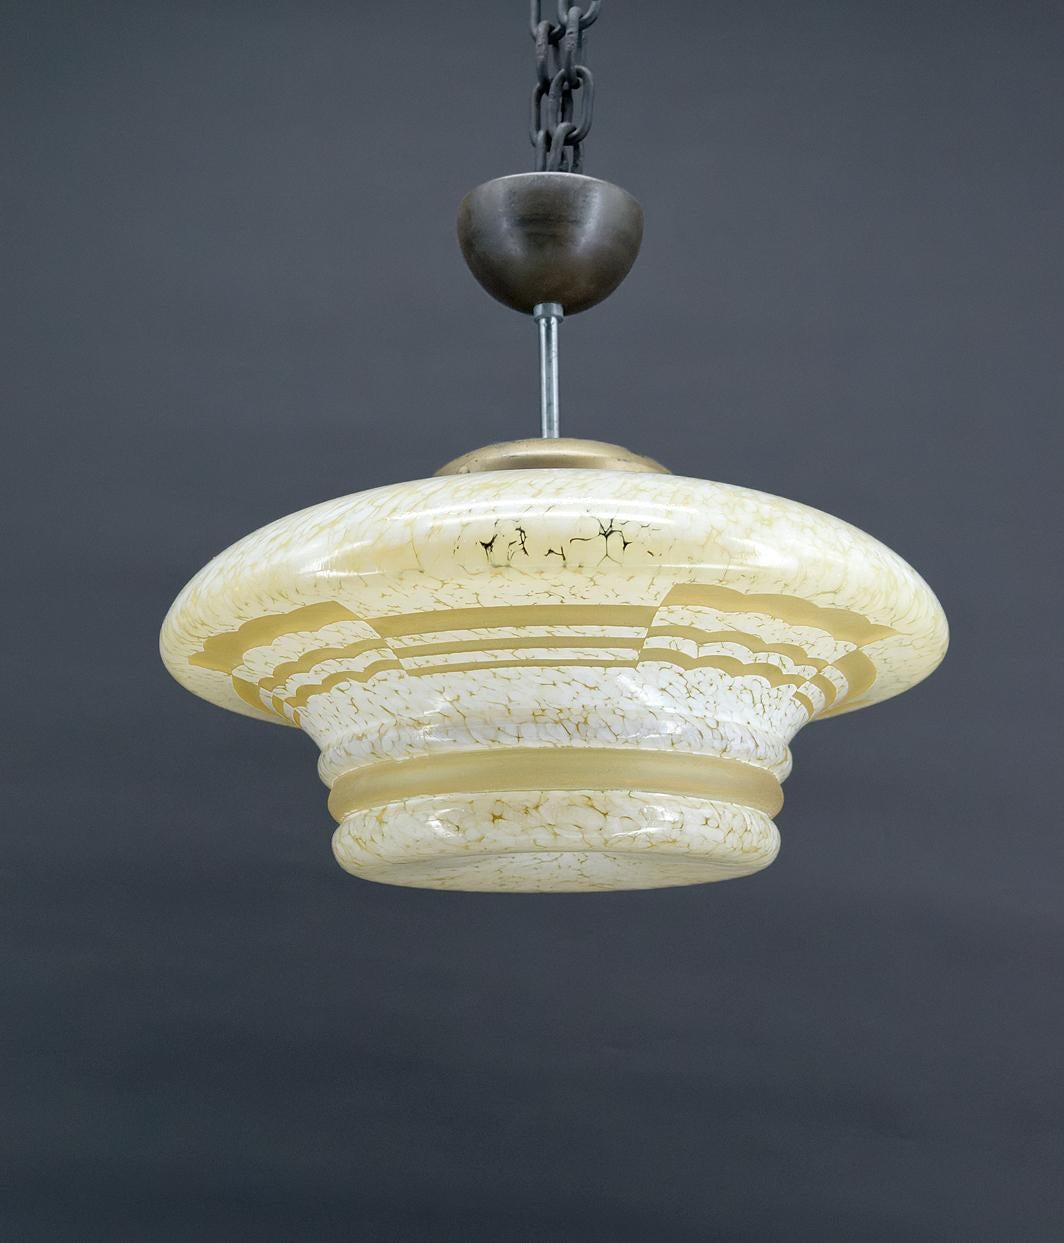 French Modernist Art Deco pendant light in acid-etched glass, France, Circa 1930 For Sale